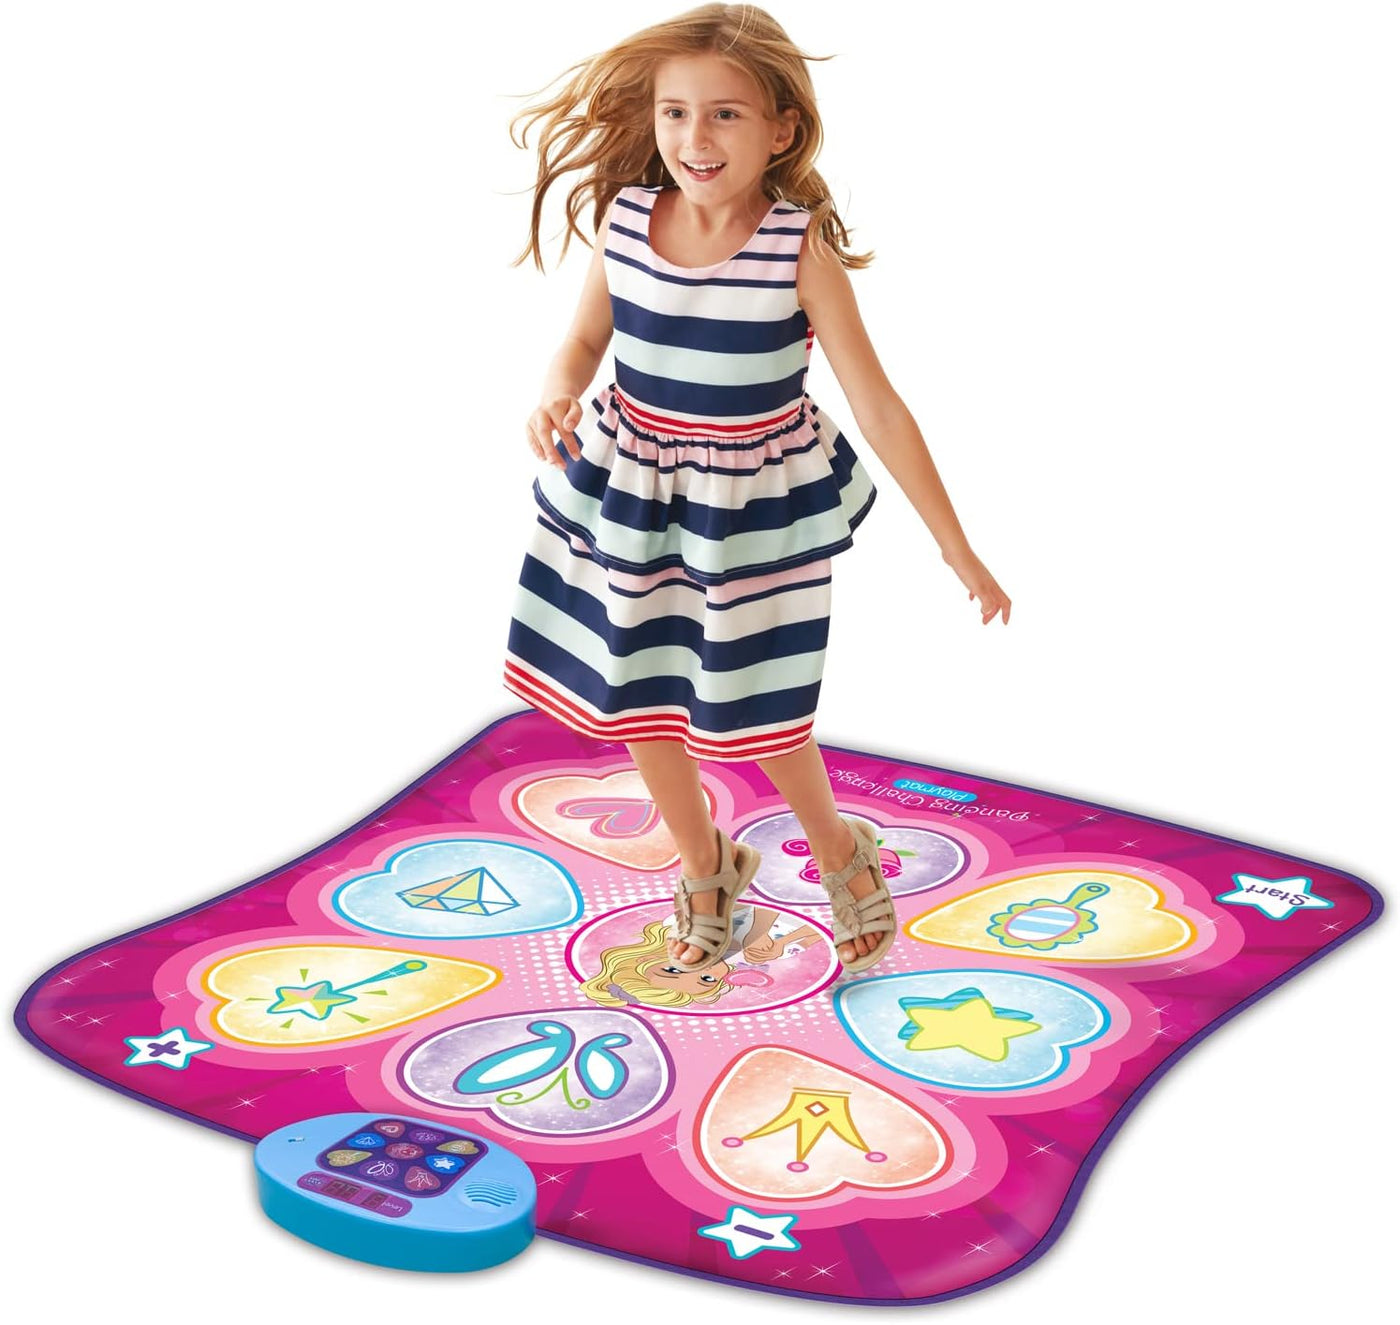 ZIPPY MAT Dance Mat, Kids Dancing Play Mat, Electronic Educational Toys for 3+ Years Old, Family Game with 4 Game Modes, AUX or Built-in Music, Adjustable Volume, Birthday Party Toys for Girls Boys